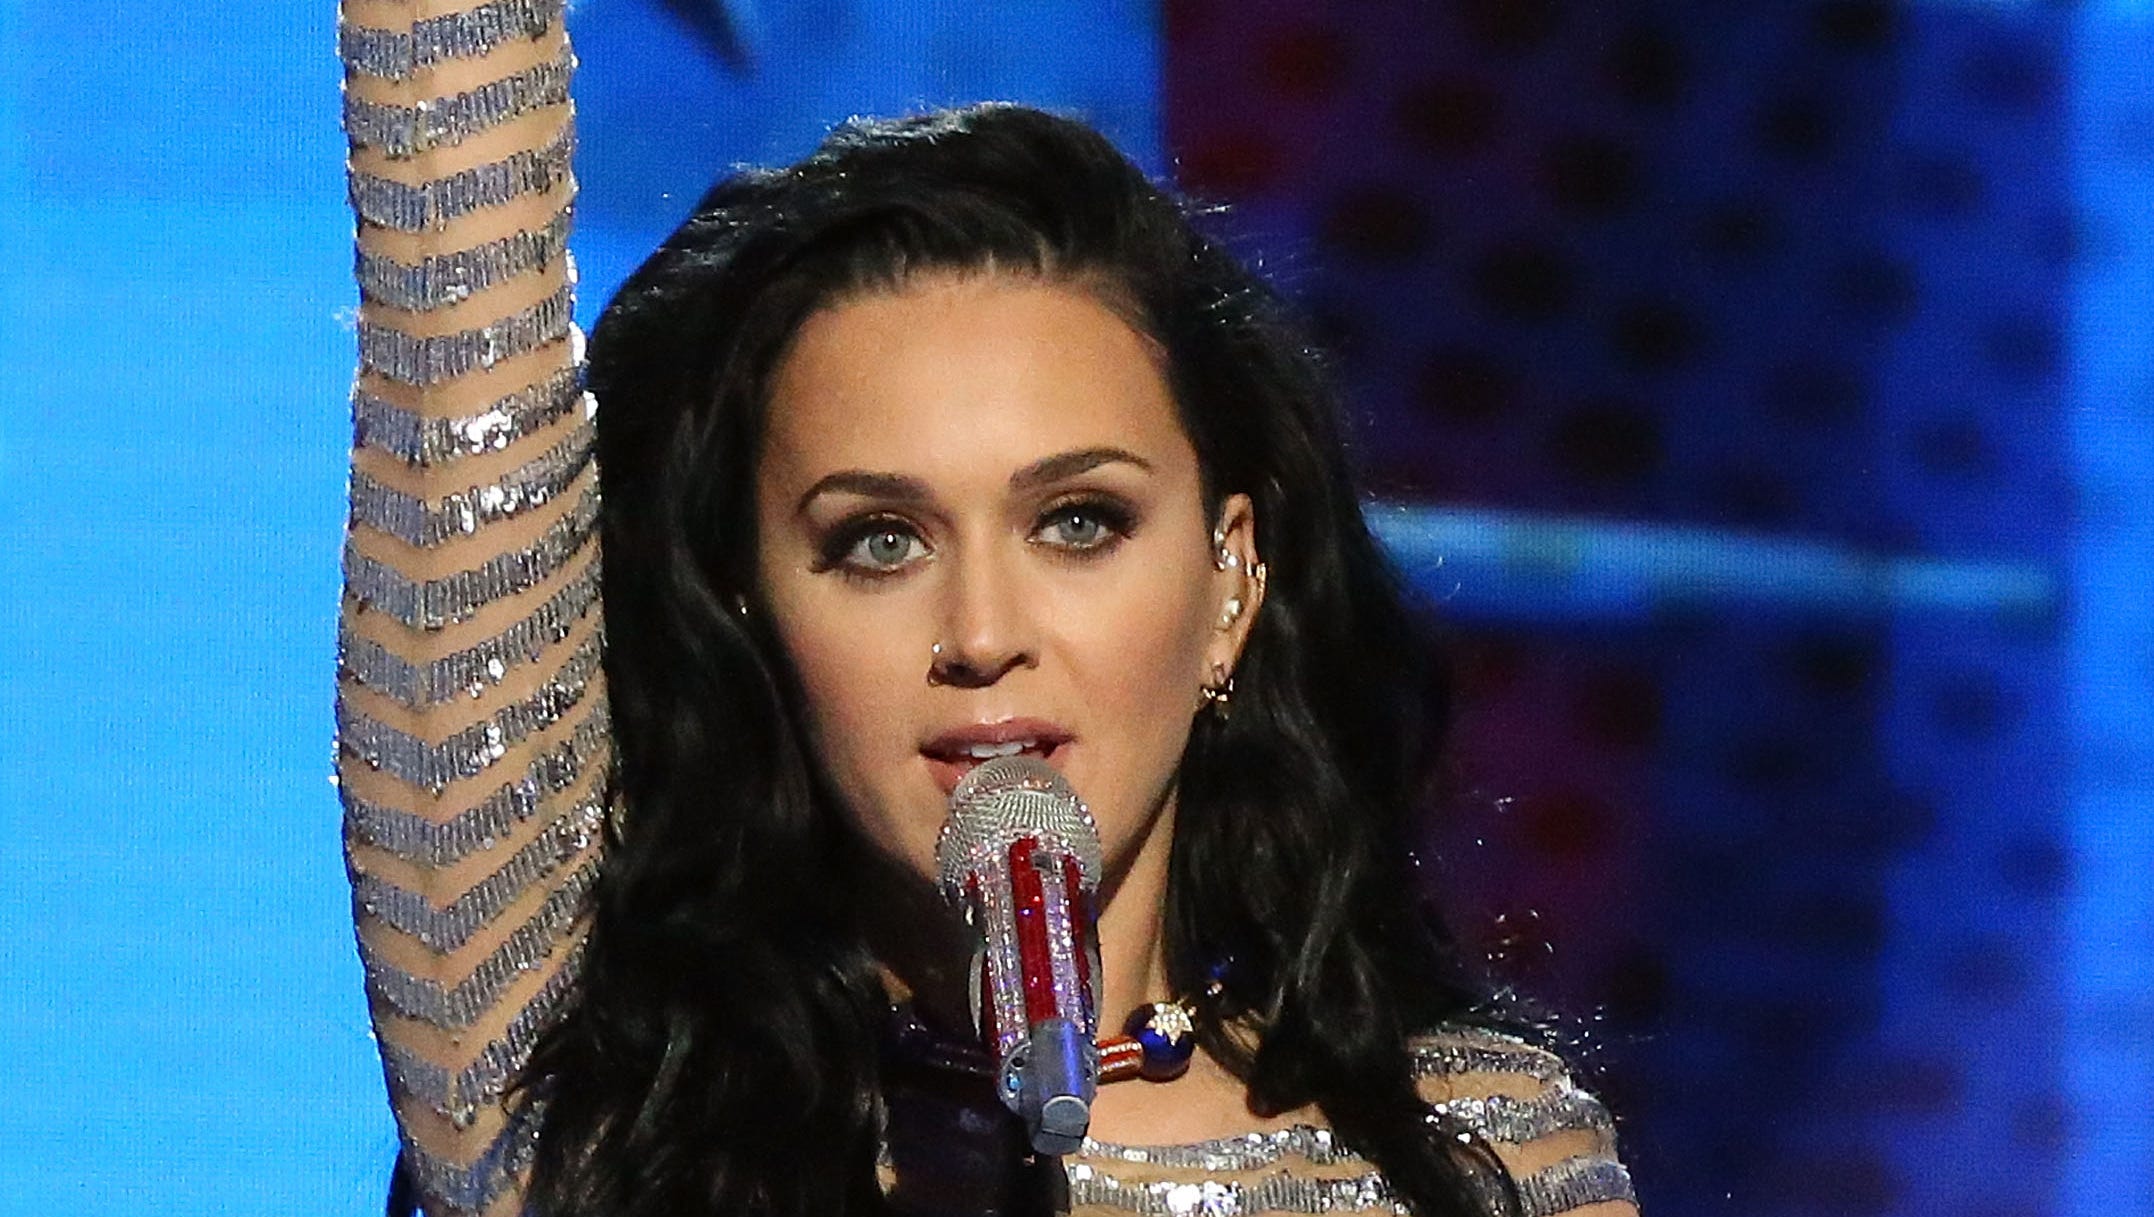 Katy Perry helps deliver a baby, then heads to the studio, as you do